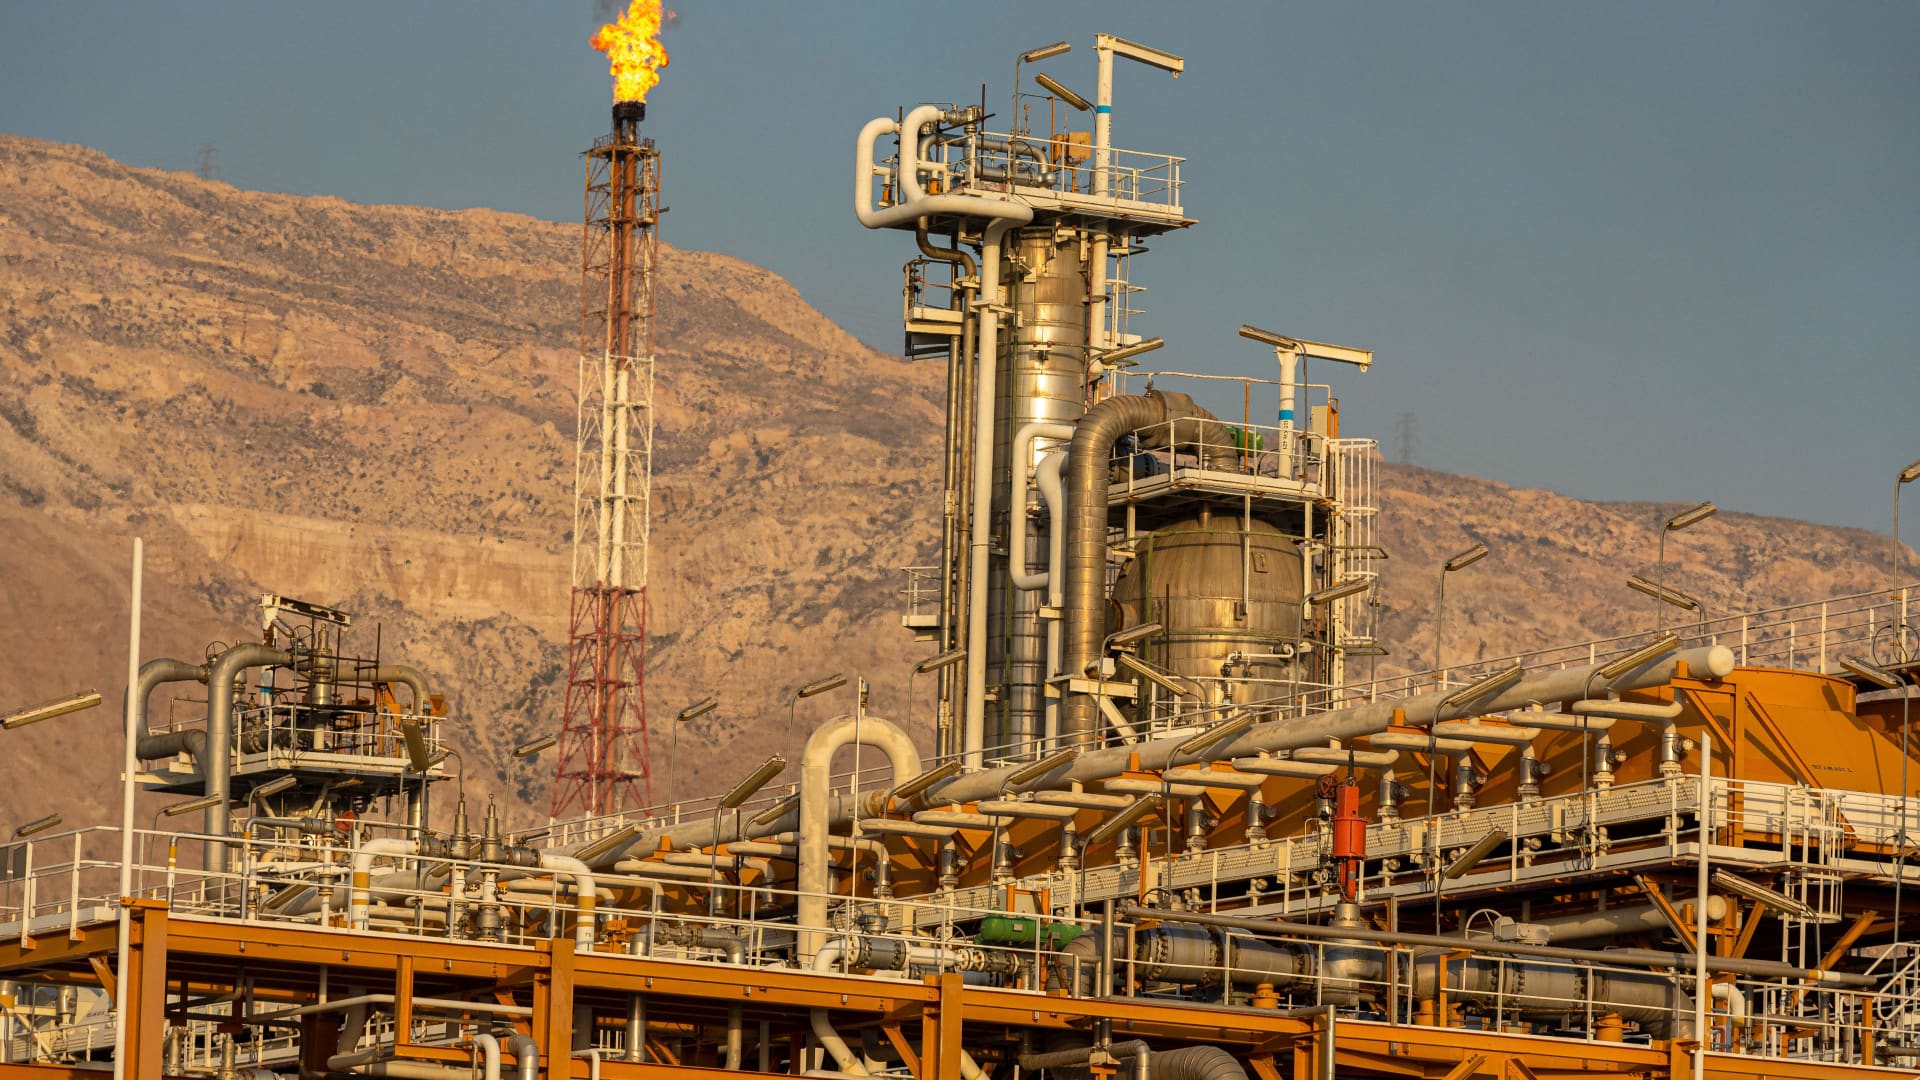 Oil prices could see 'super spike well above $100' if conflict escalates after Iran's attack on Israel